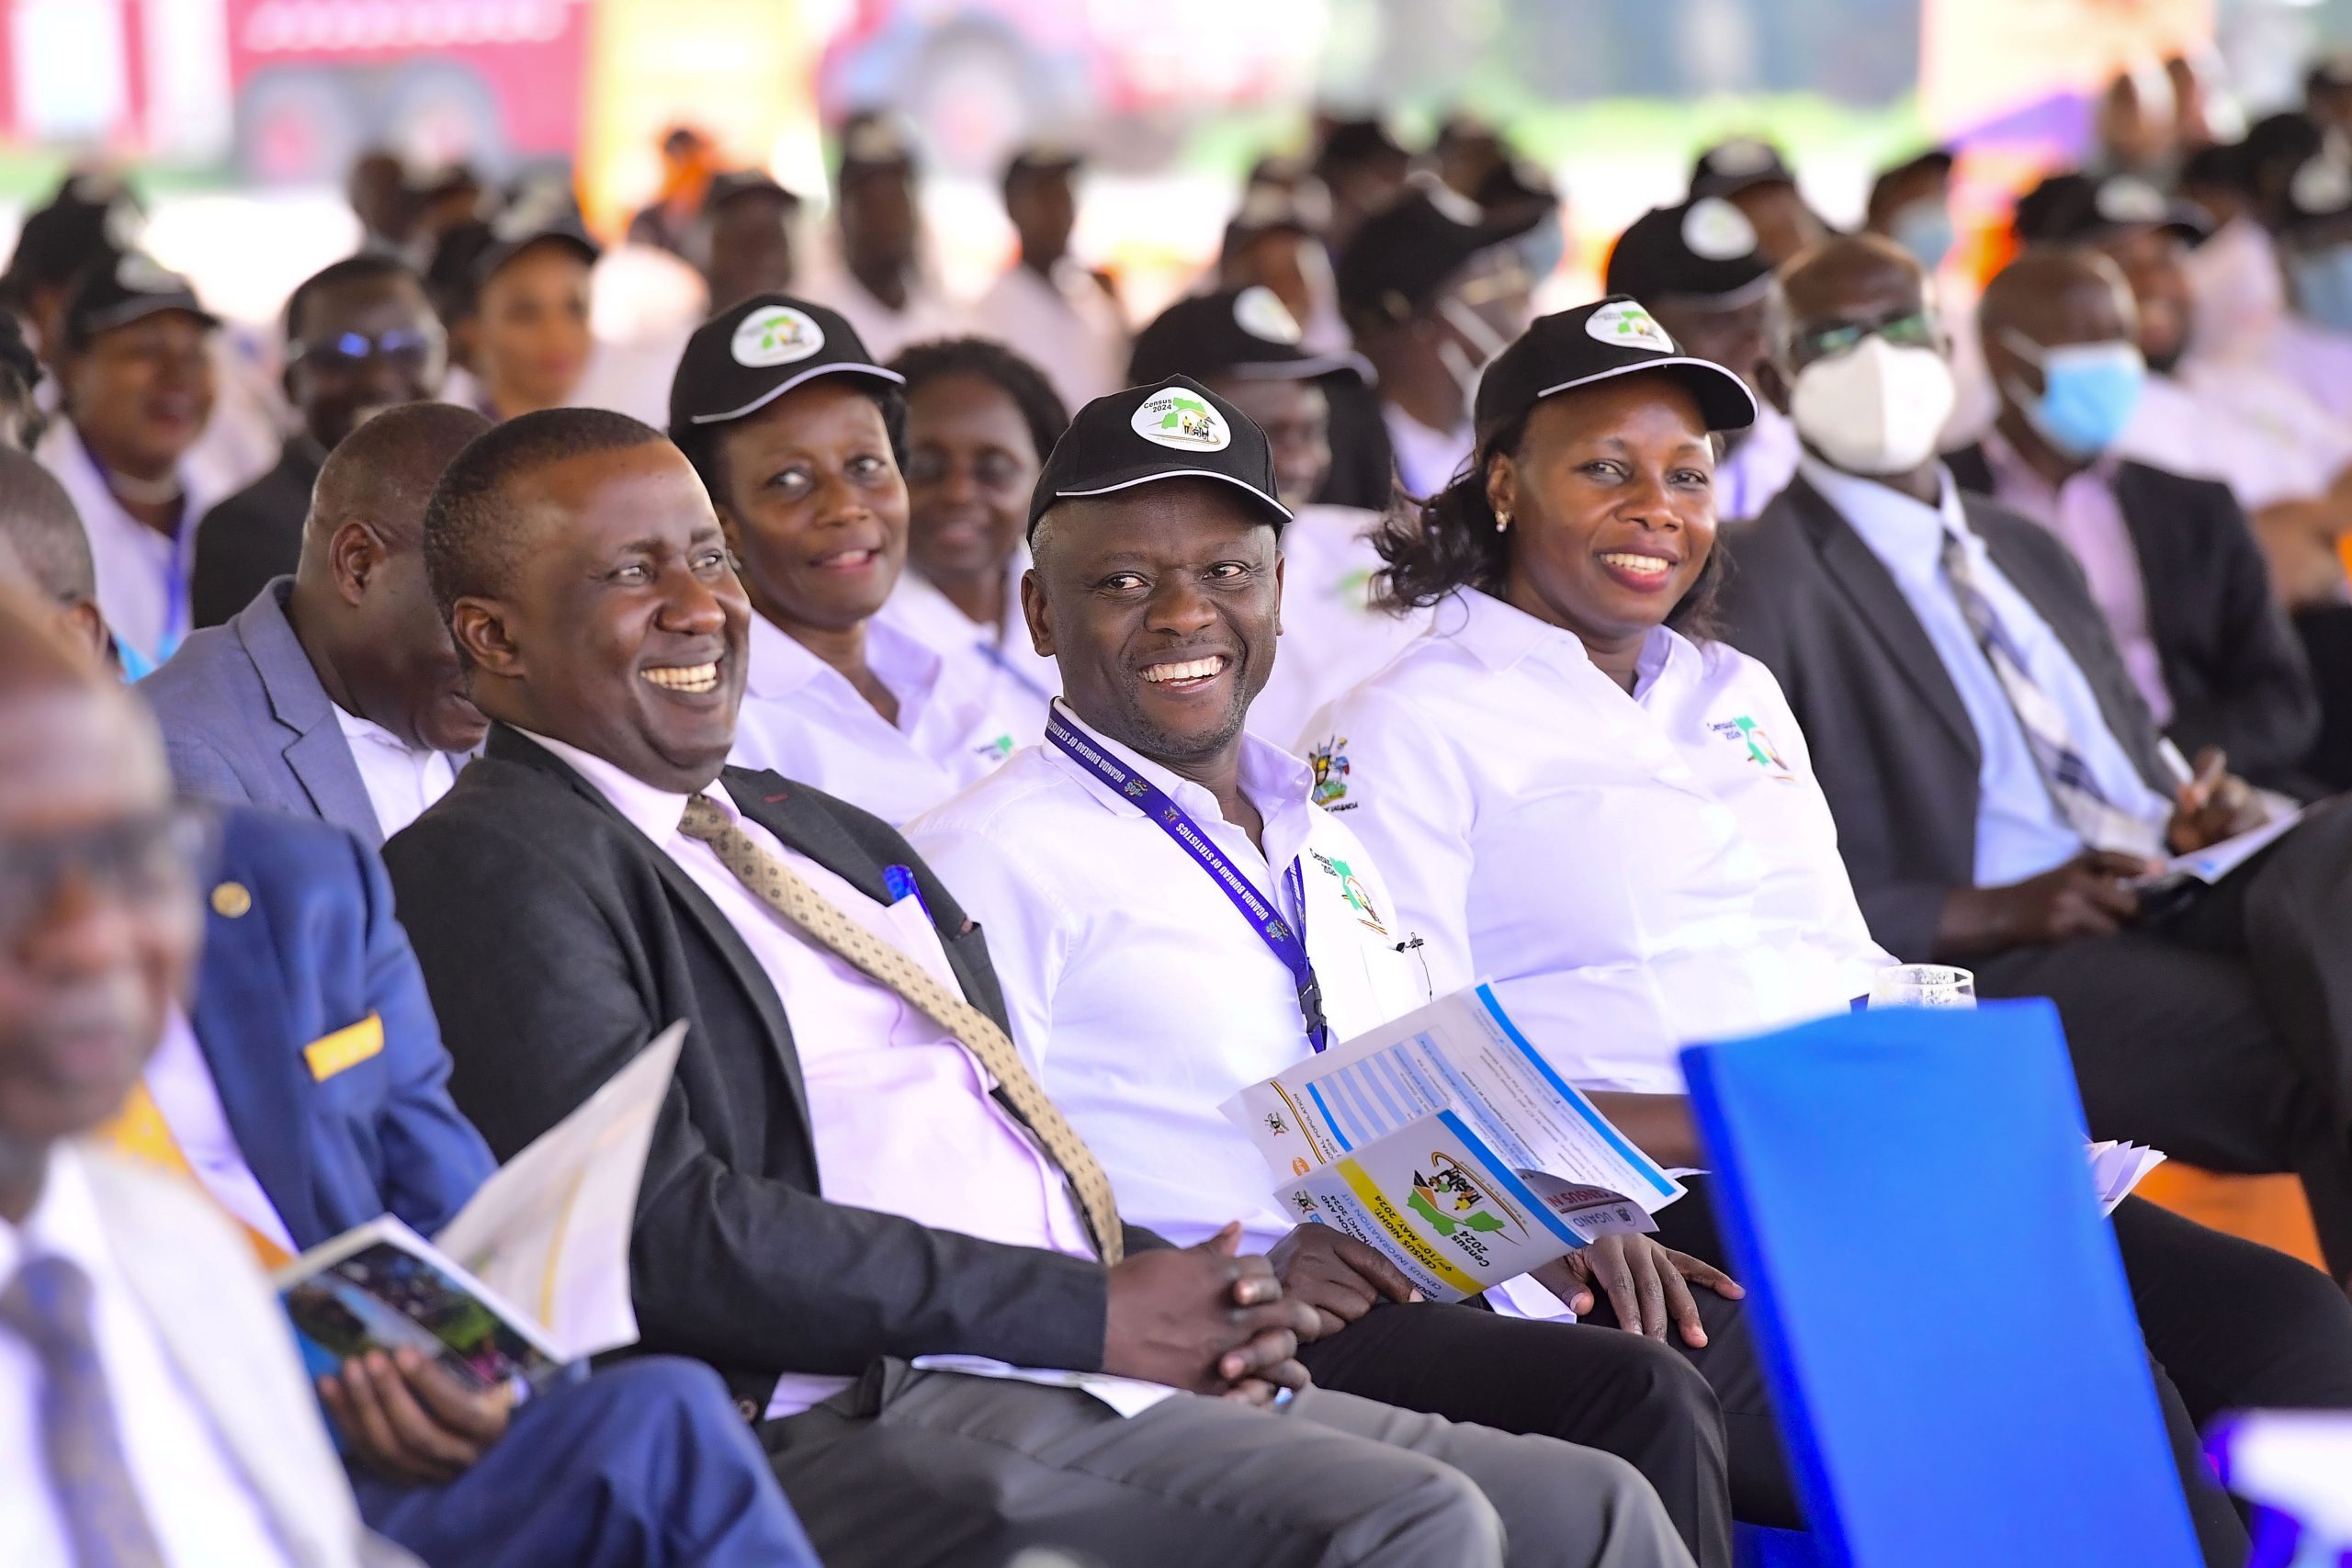 “ENDEAVOR TO BE COUNTED,” SAYS PRESIDENT MUSEVENI AS HE LAUNCHES THE